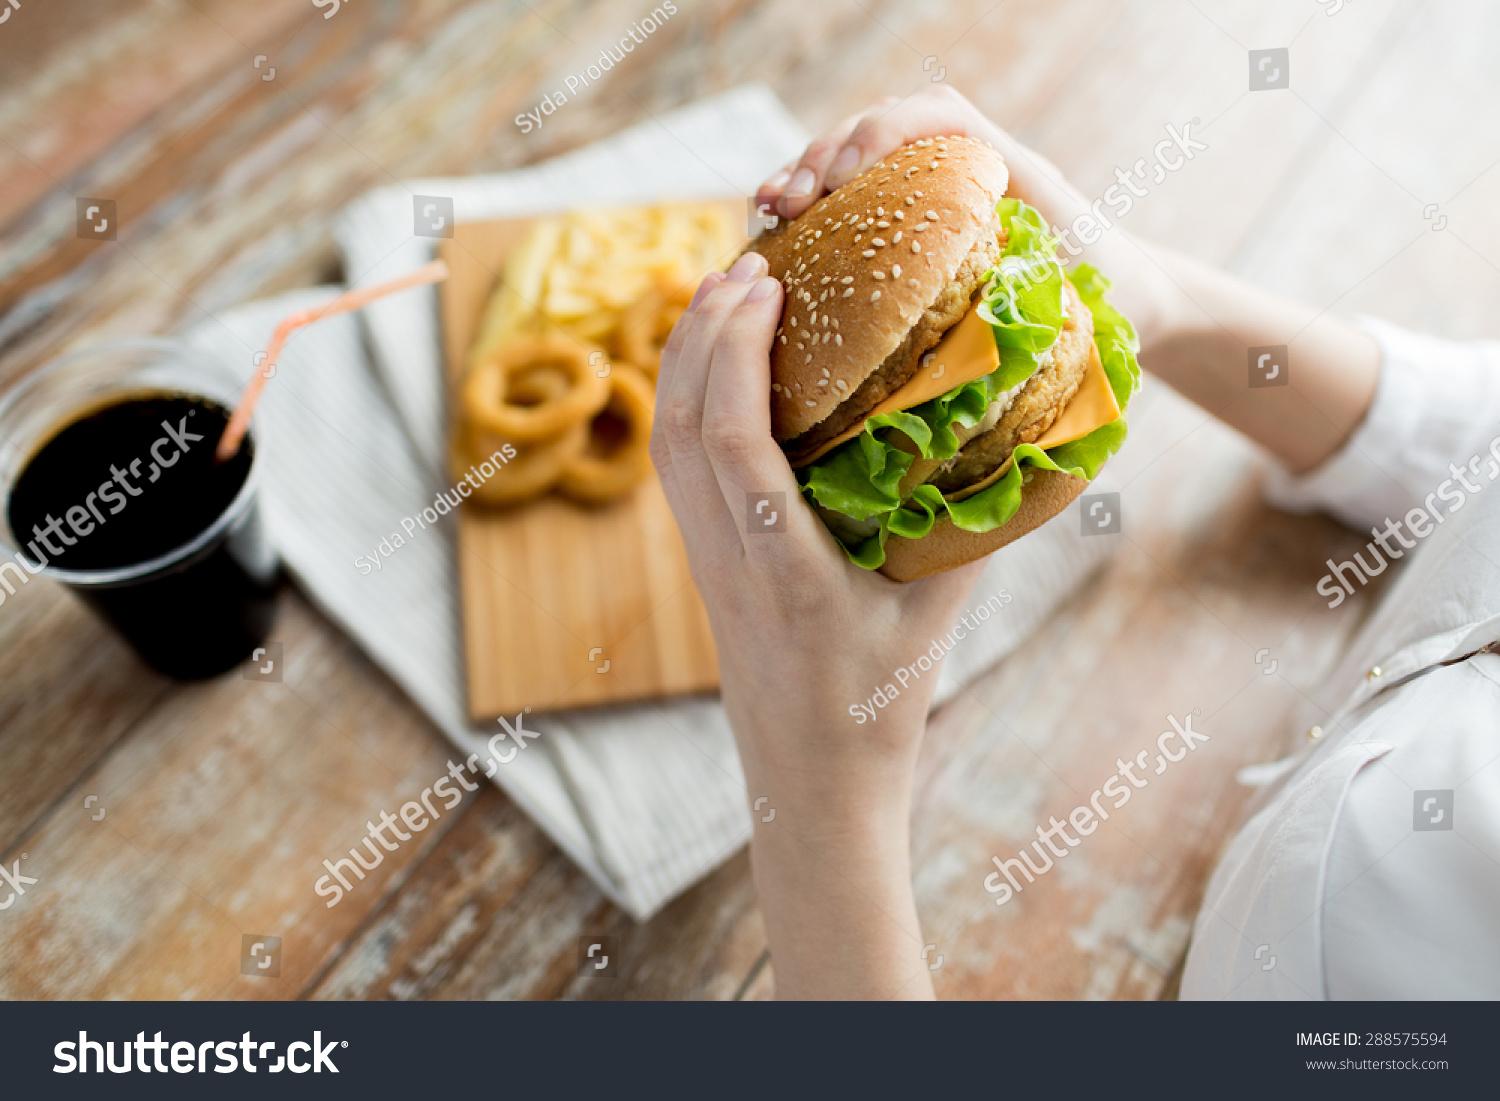 fast food, people and unhealthy eating concept - close up of woman hands holding hamburger or cheeseburger #288575594